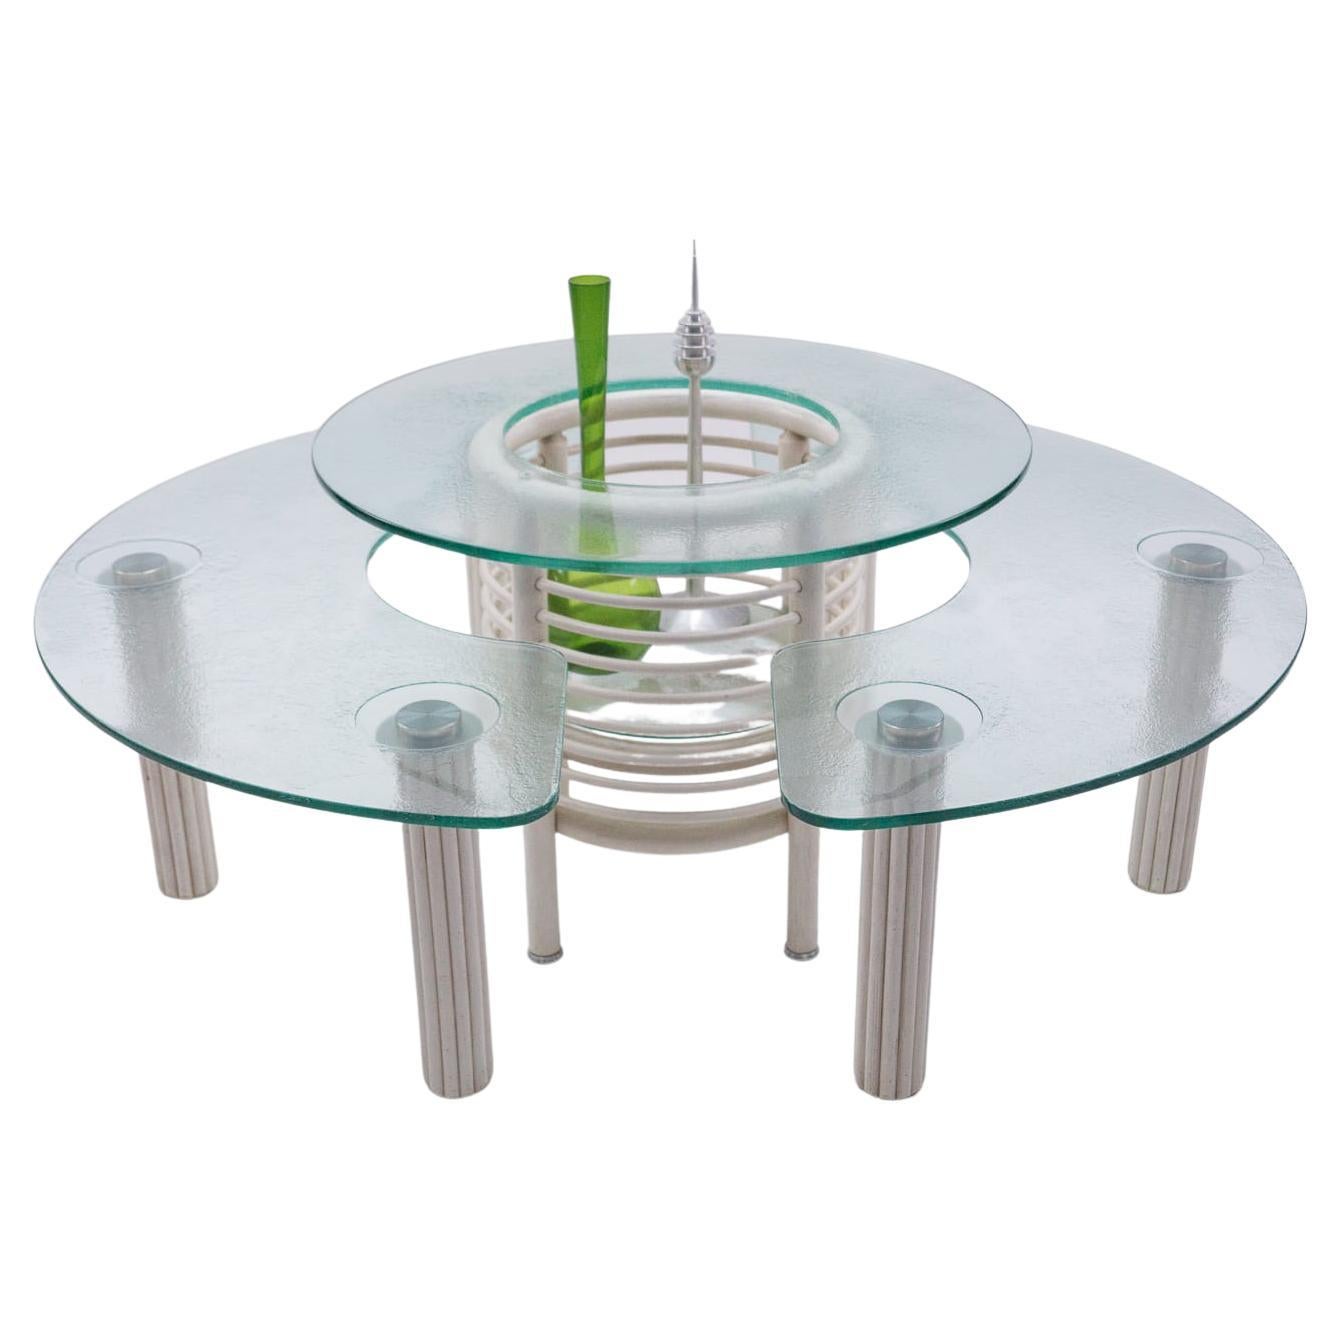 The opening in the middle table has a diameter of 33cm, so all kinds of beverage bottle can be placed in it.

The diameter of the whole table top of the middle table is 70cm.

The height of the semicircular side tables is 39.5cm.